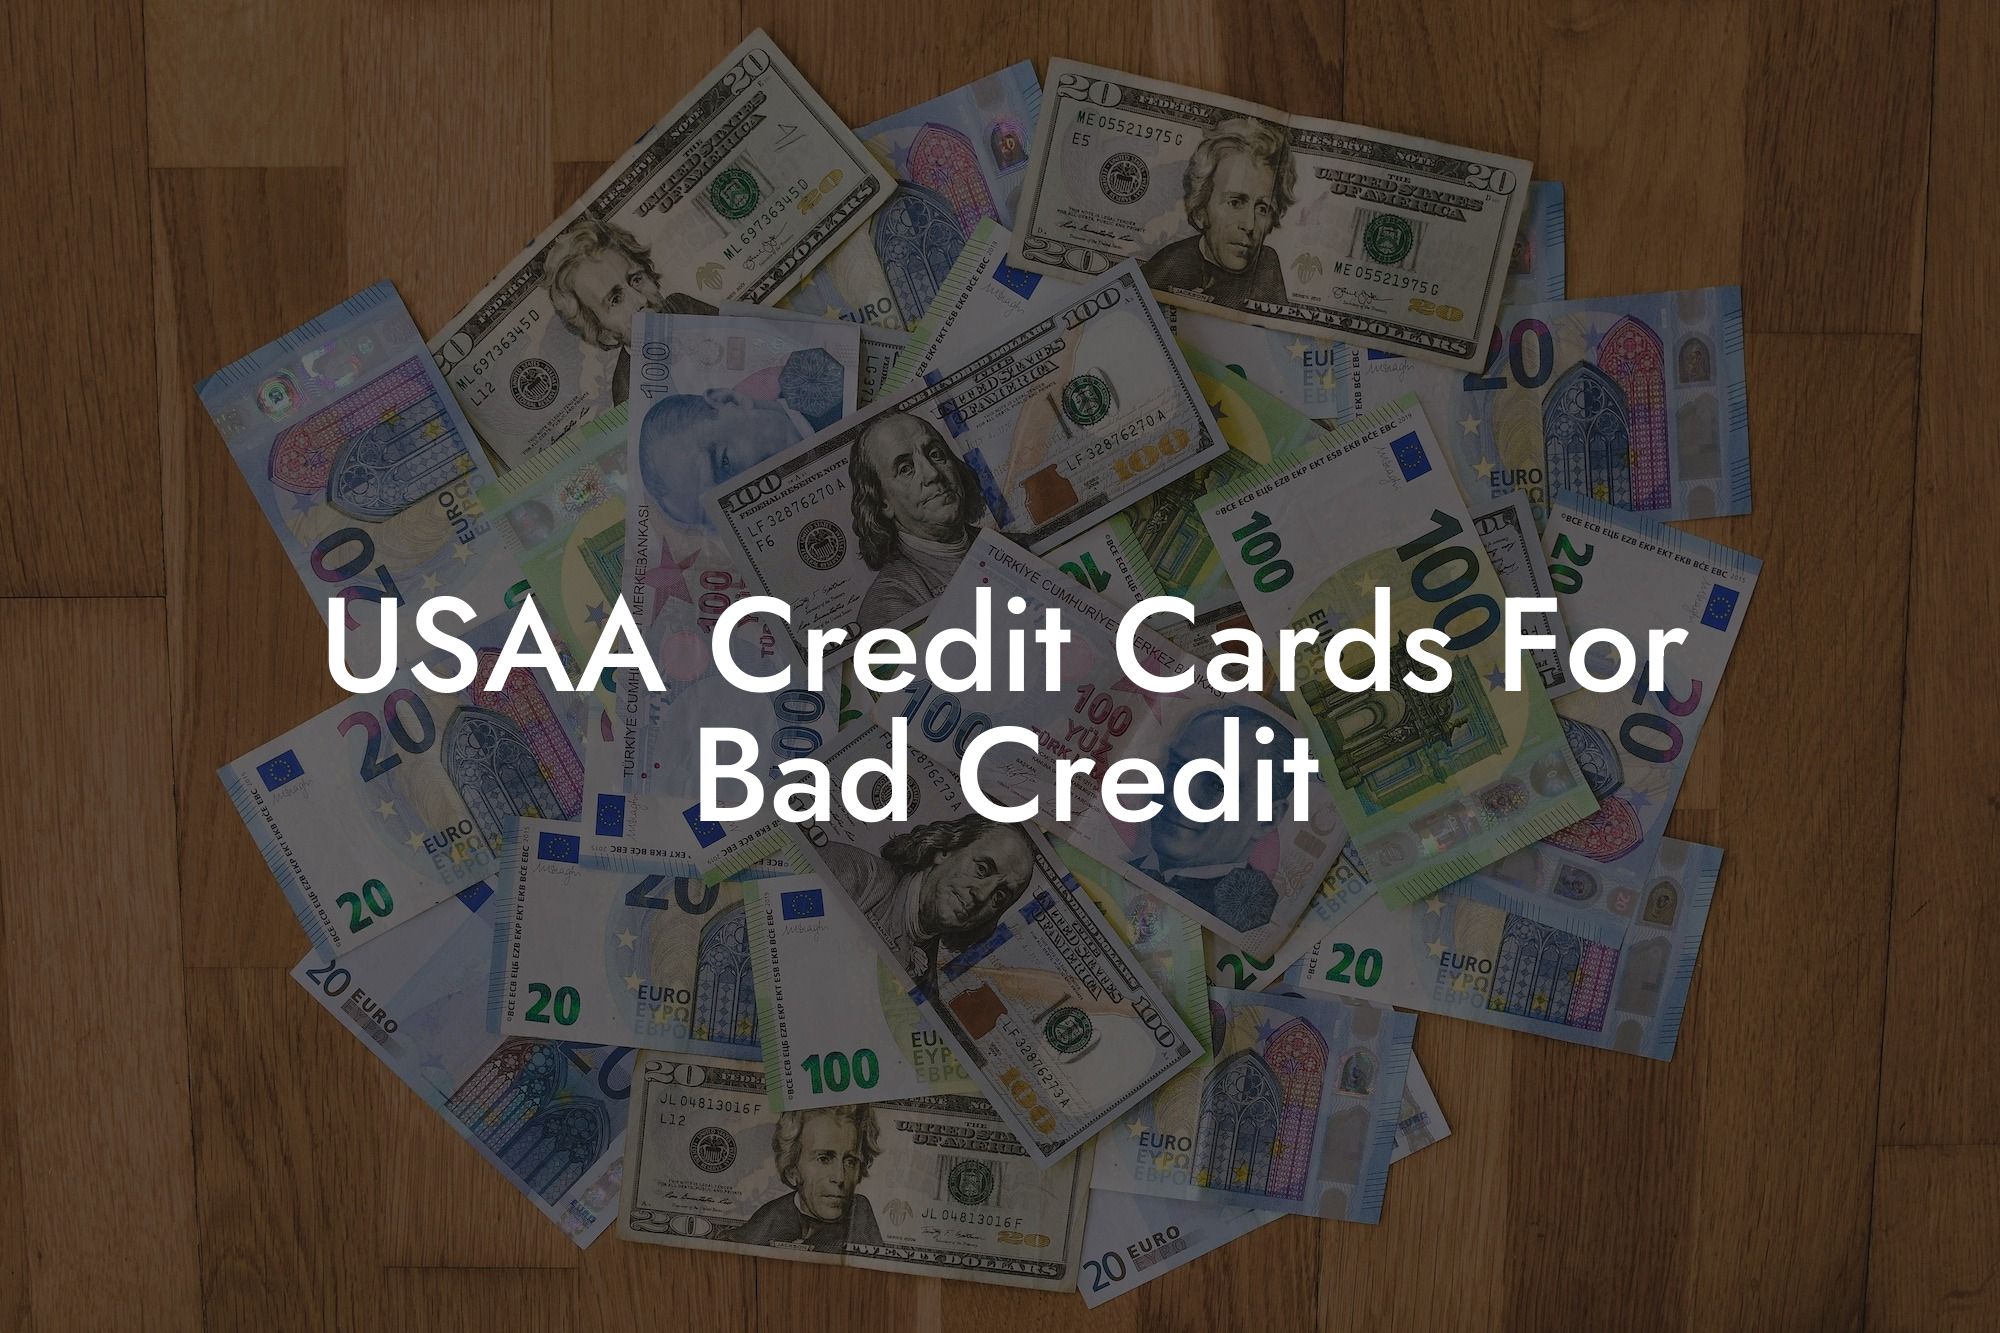 USAA Credit Cards For Bad Credit